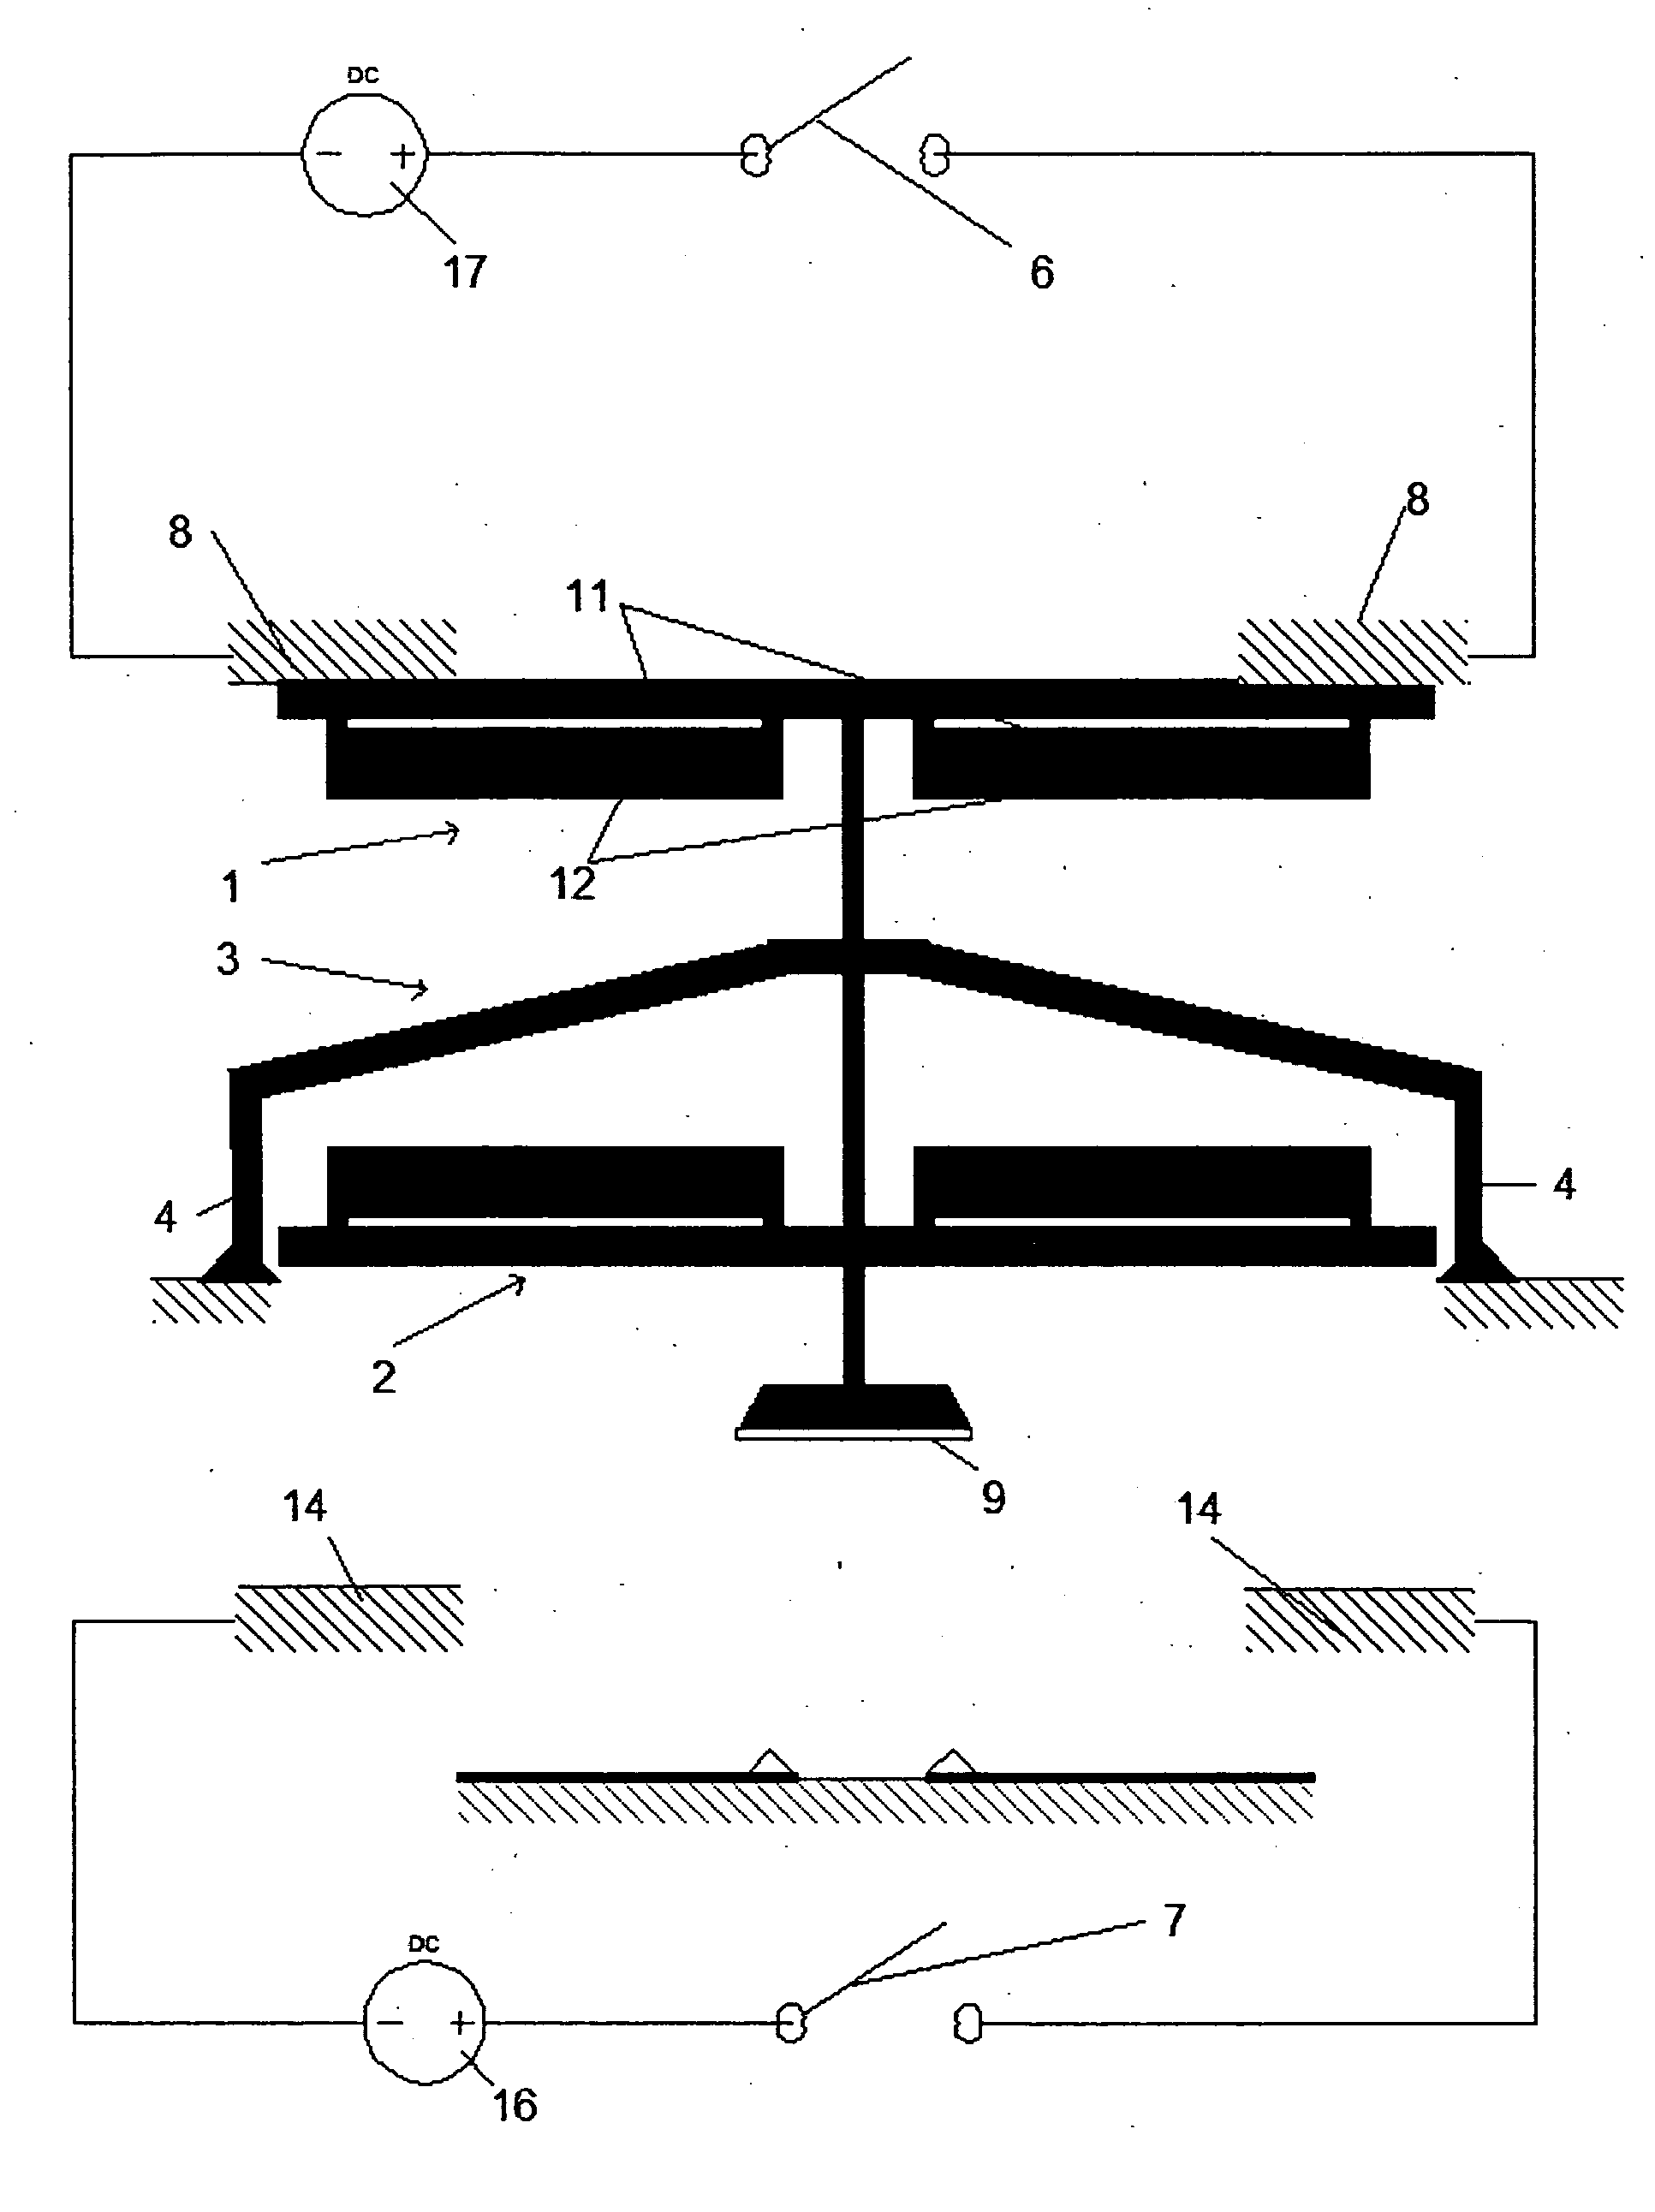 MEMS switch with bistable element having straight beam components